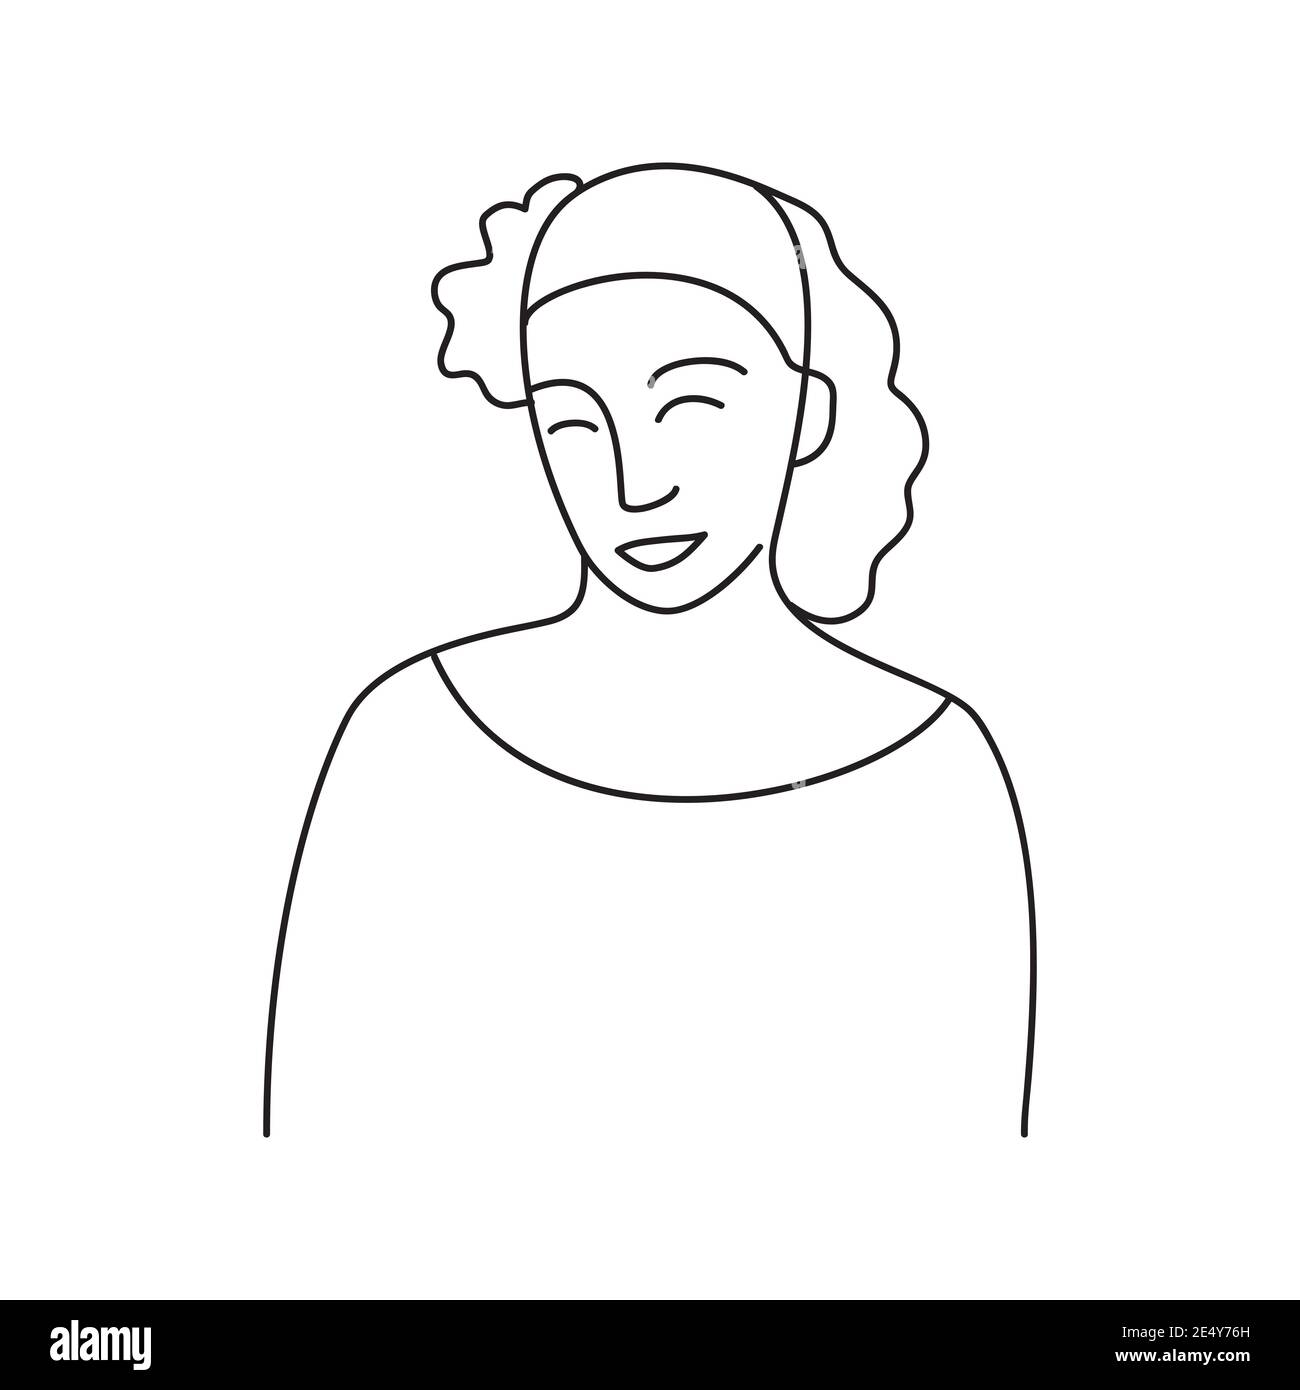 Minimalism Hand Drawn Female Vector Portrait In Modern Abstract One Line Drawing Graphic Style Decor Print Wall Art Creative Design For Social Medi Stock Vector Image Art Alamy